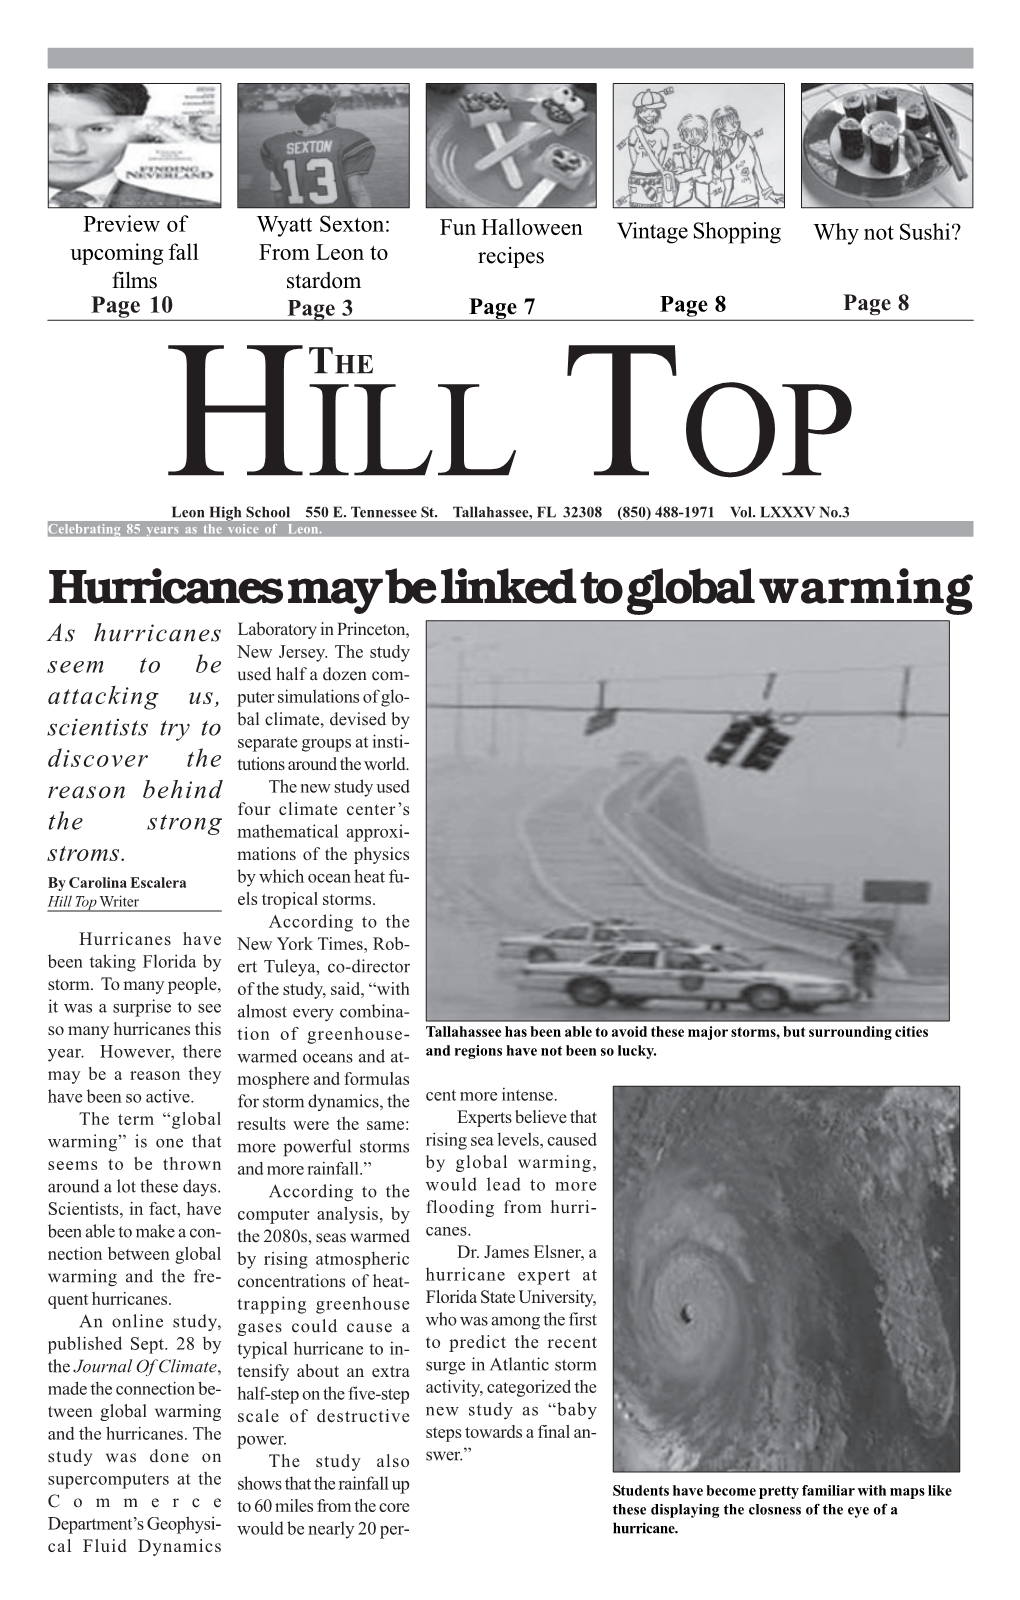 Hurricanes May Be Linked to Global Warming As Hurricanes Laboratory in Princeton, New Jersey